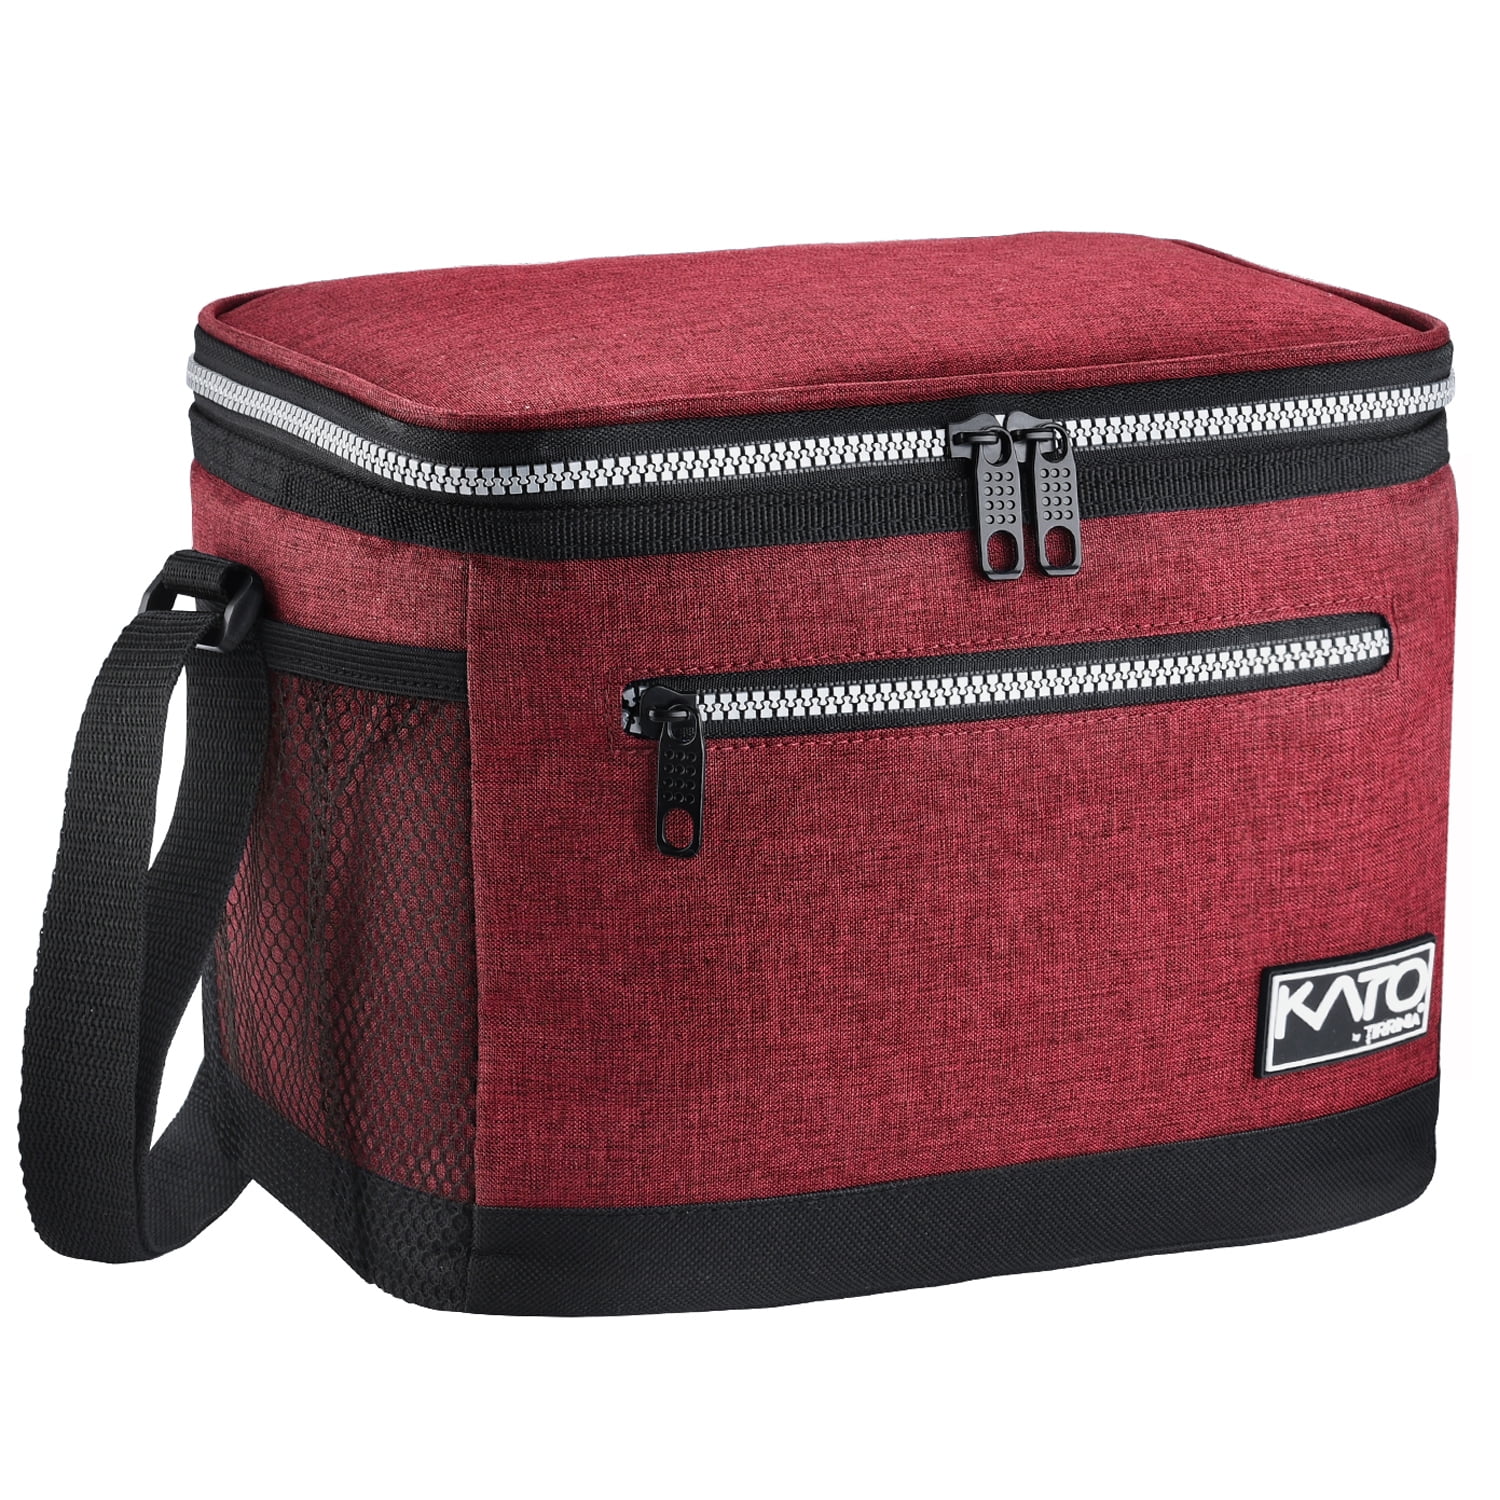 Kato Small Insulated Lunch Bag, Mini Thermal Portable Cooler Lunch Box Tote with Dual Zipper Closure for Men and Women, Red